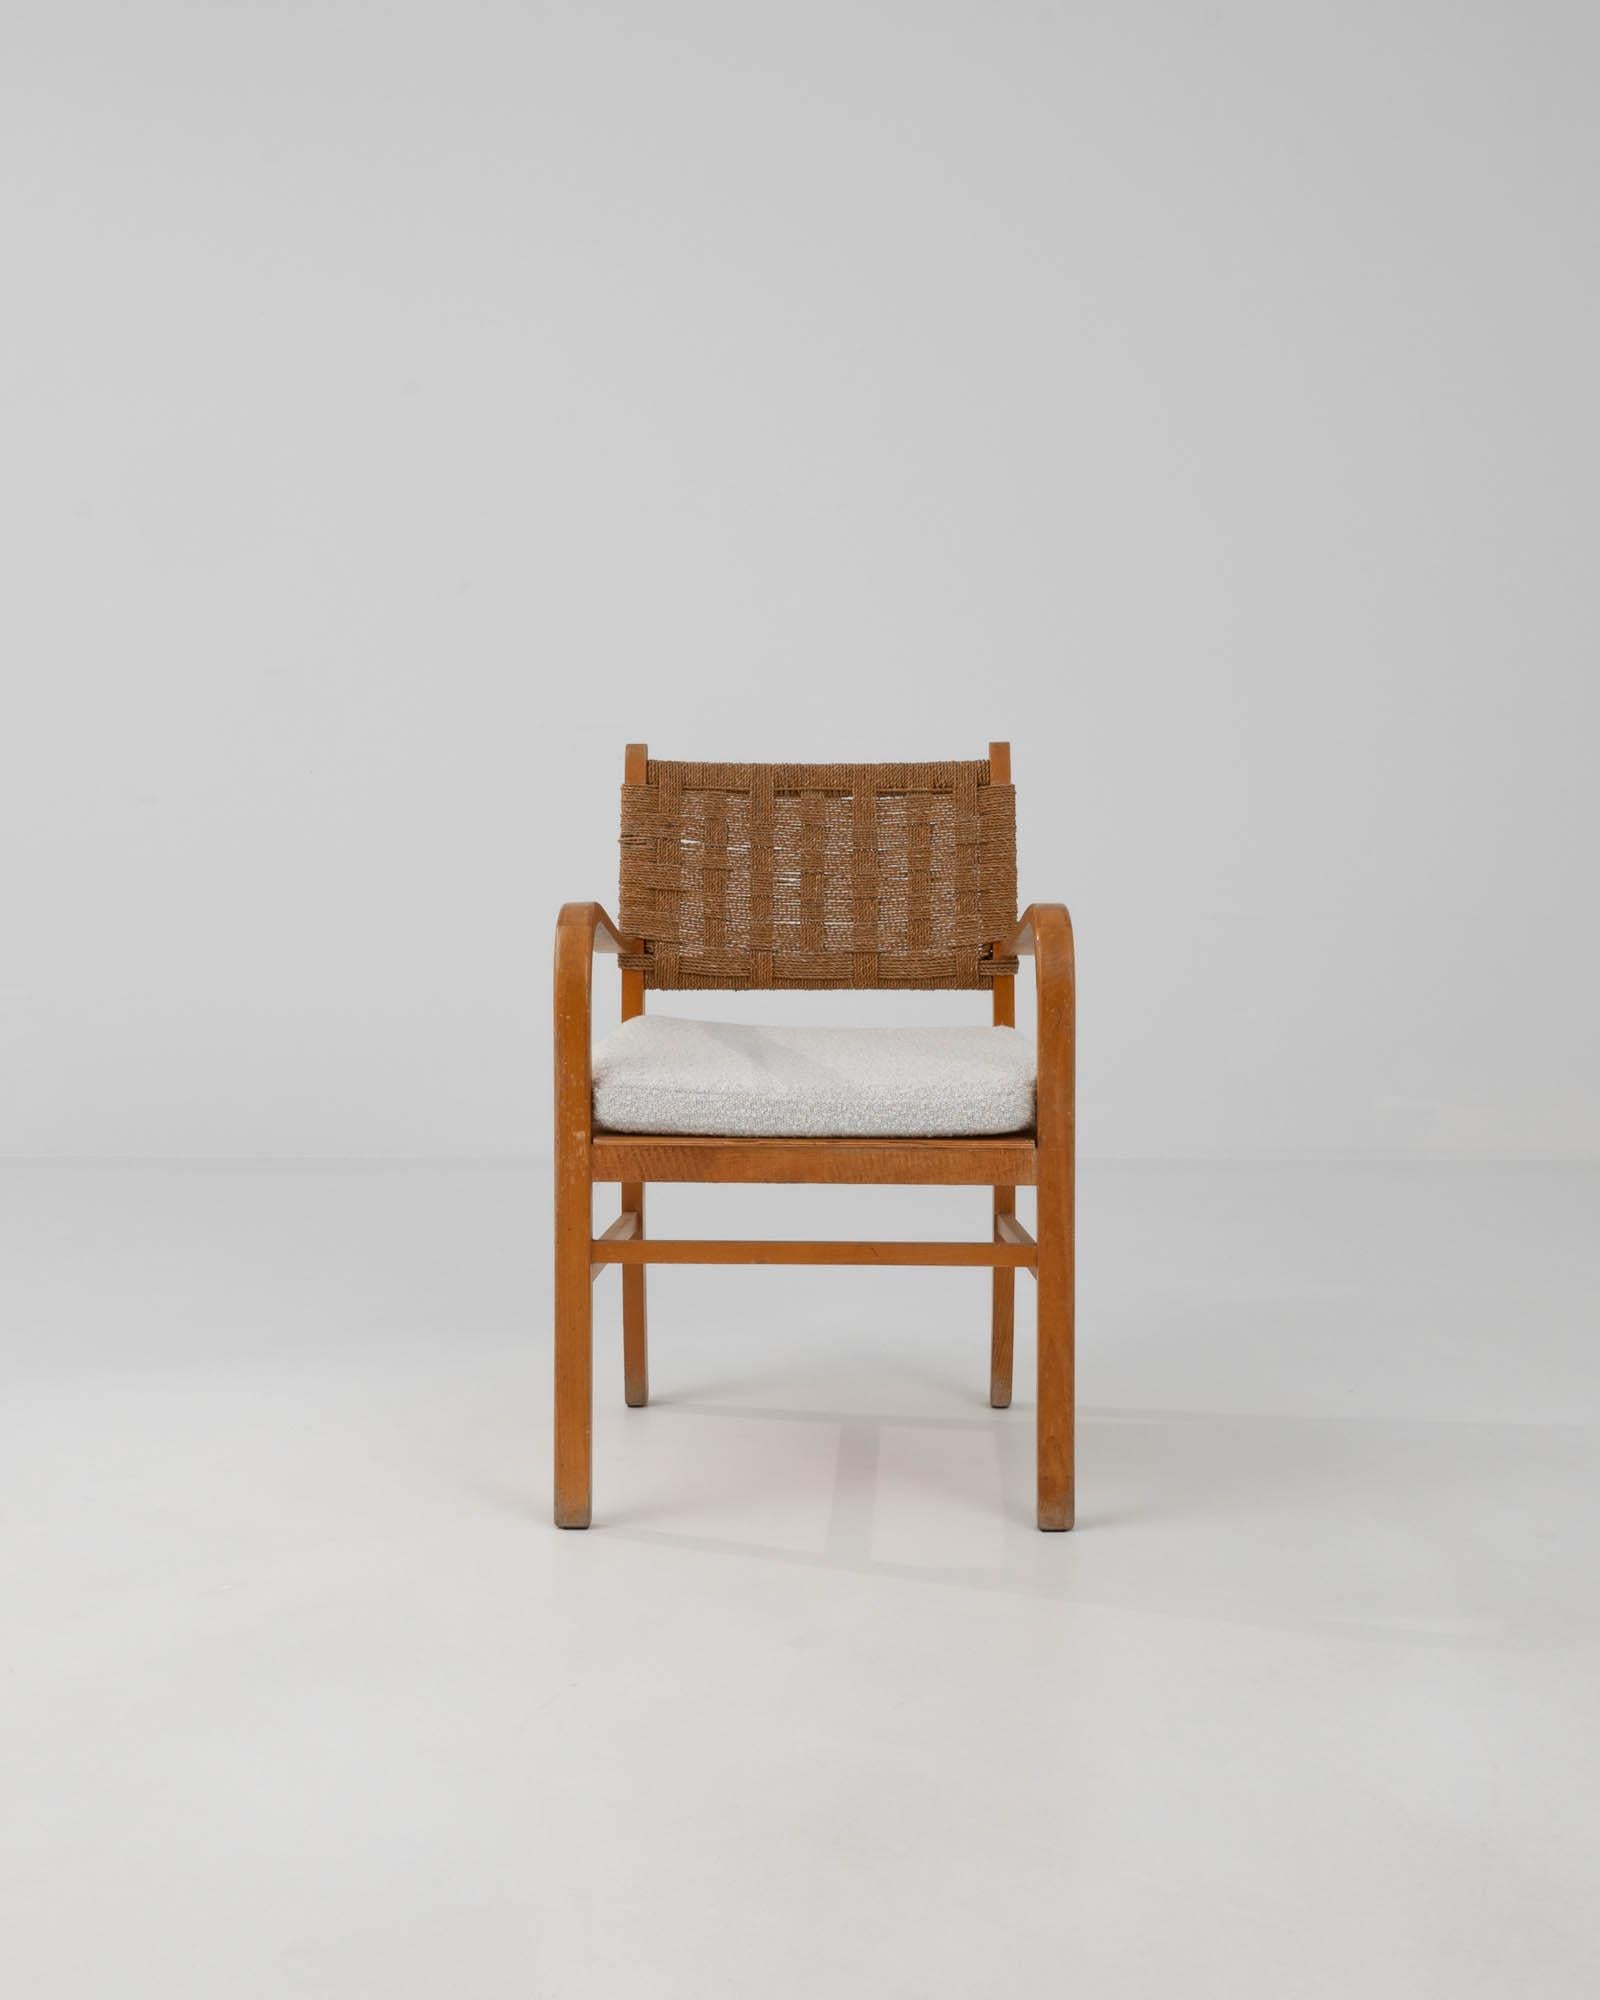 This wooden armchair was made in Scandinavia in the 20th Century. Featuring the natural colors and textures for which Scandinavian design is known; a corded wickerer seat back pairs with russet toned hardwood and a soft boucle seat. The spartan